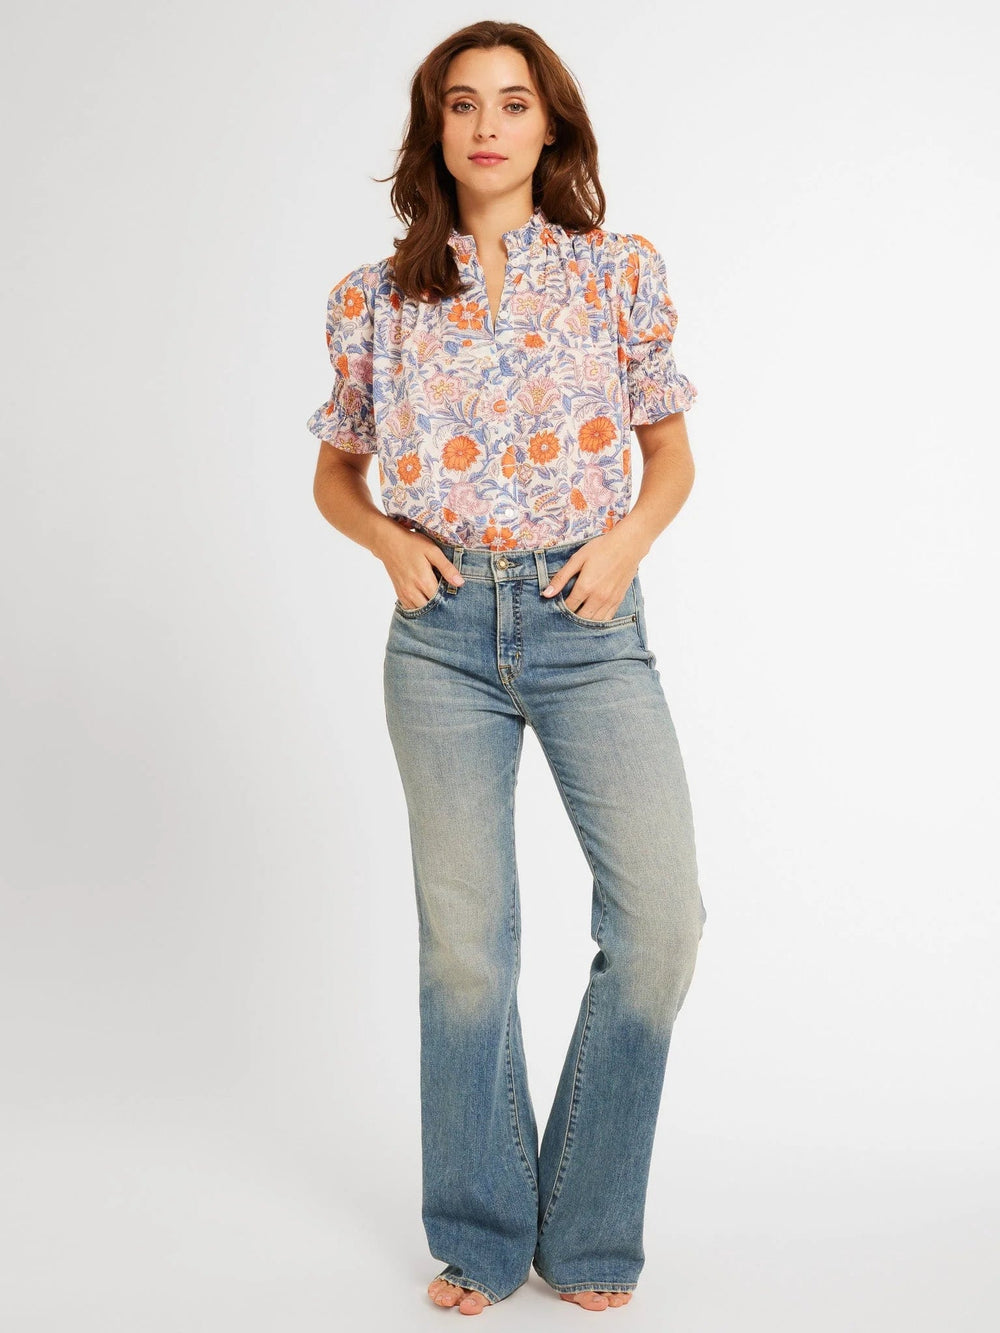 Mille Top Marnie Top in Newport Floral